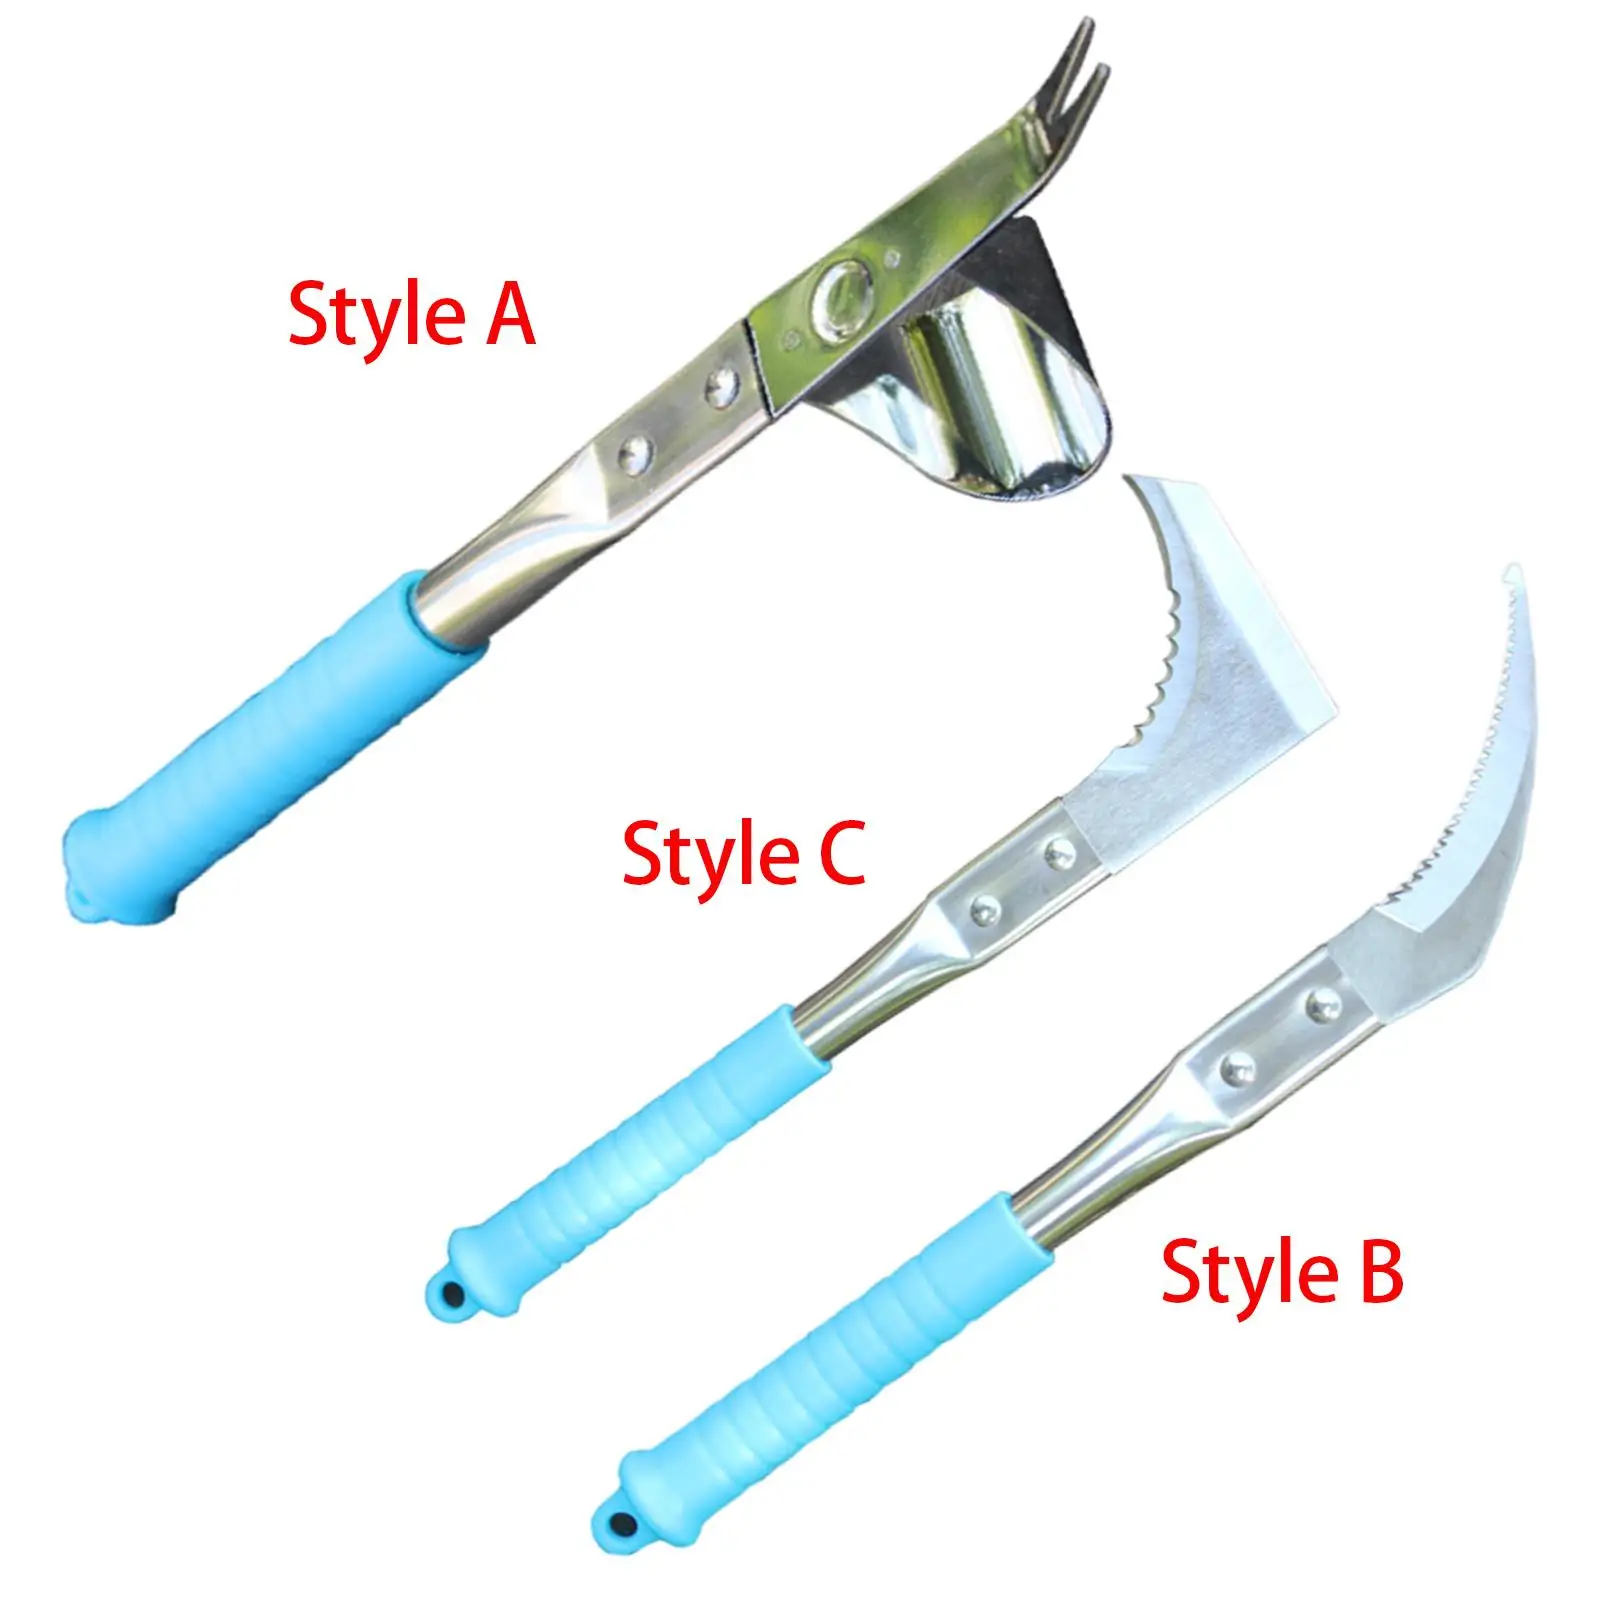 Manual Weeds Puller Stainless Garden Weeding Tool Weeds Removal Tool for Lawn Planter Potted Flower Bed Yard Garden